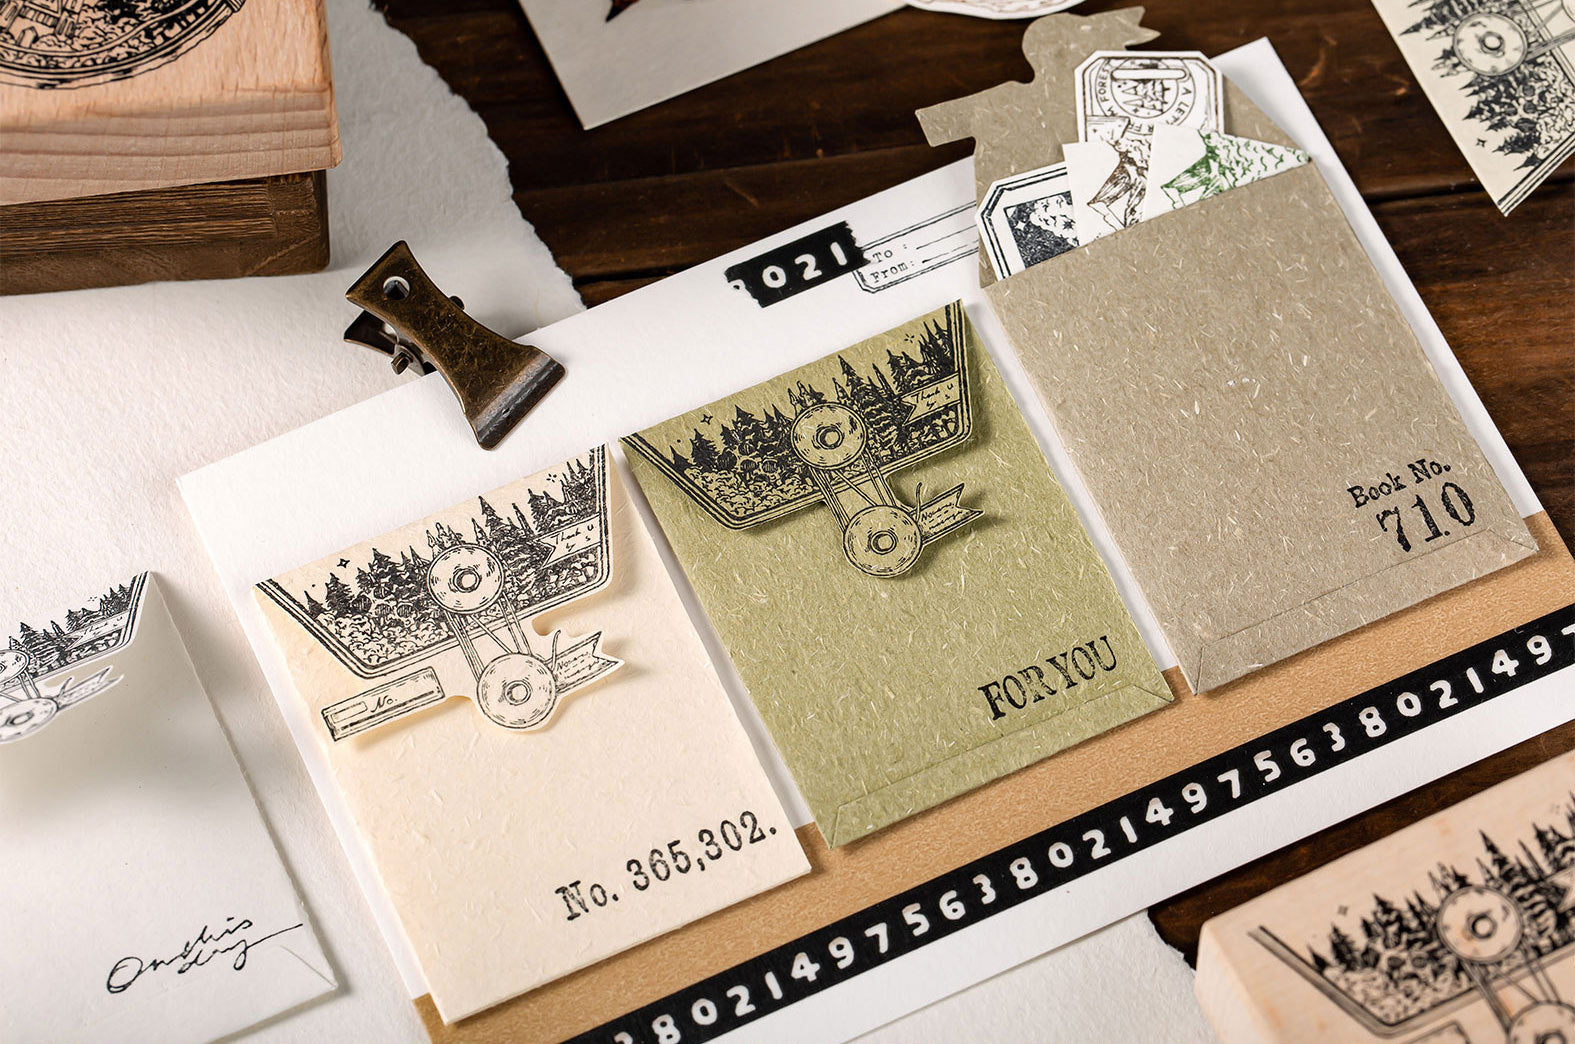 Reco Studio Rubber Stamp: Forest